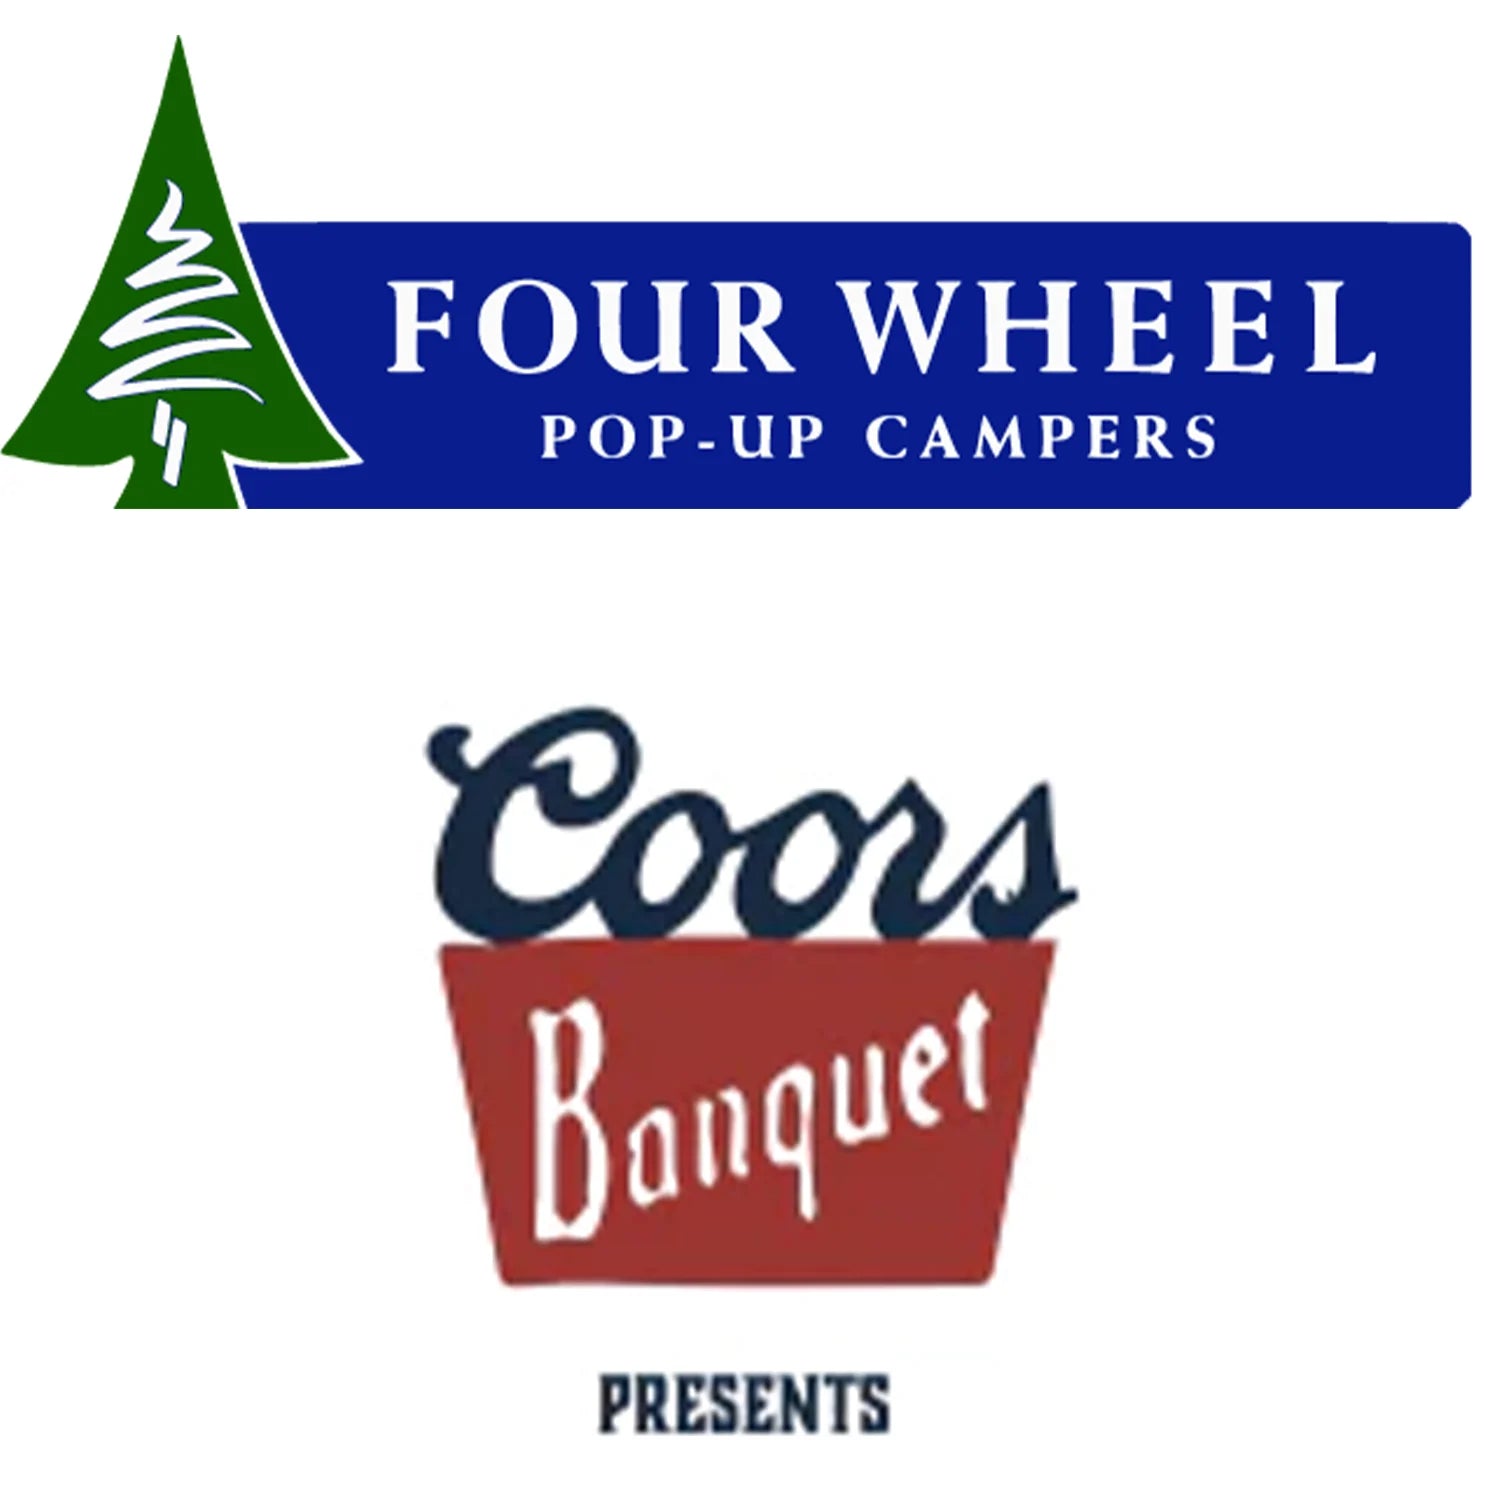 presented by coors banquet